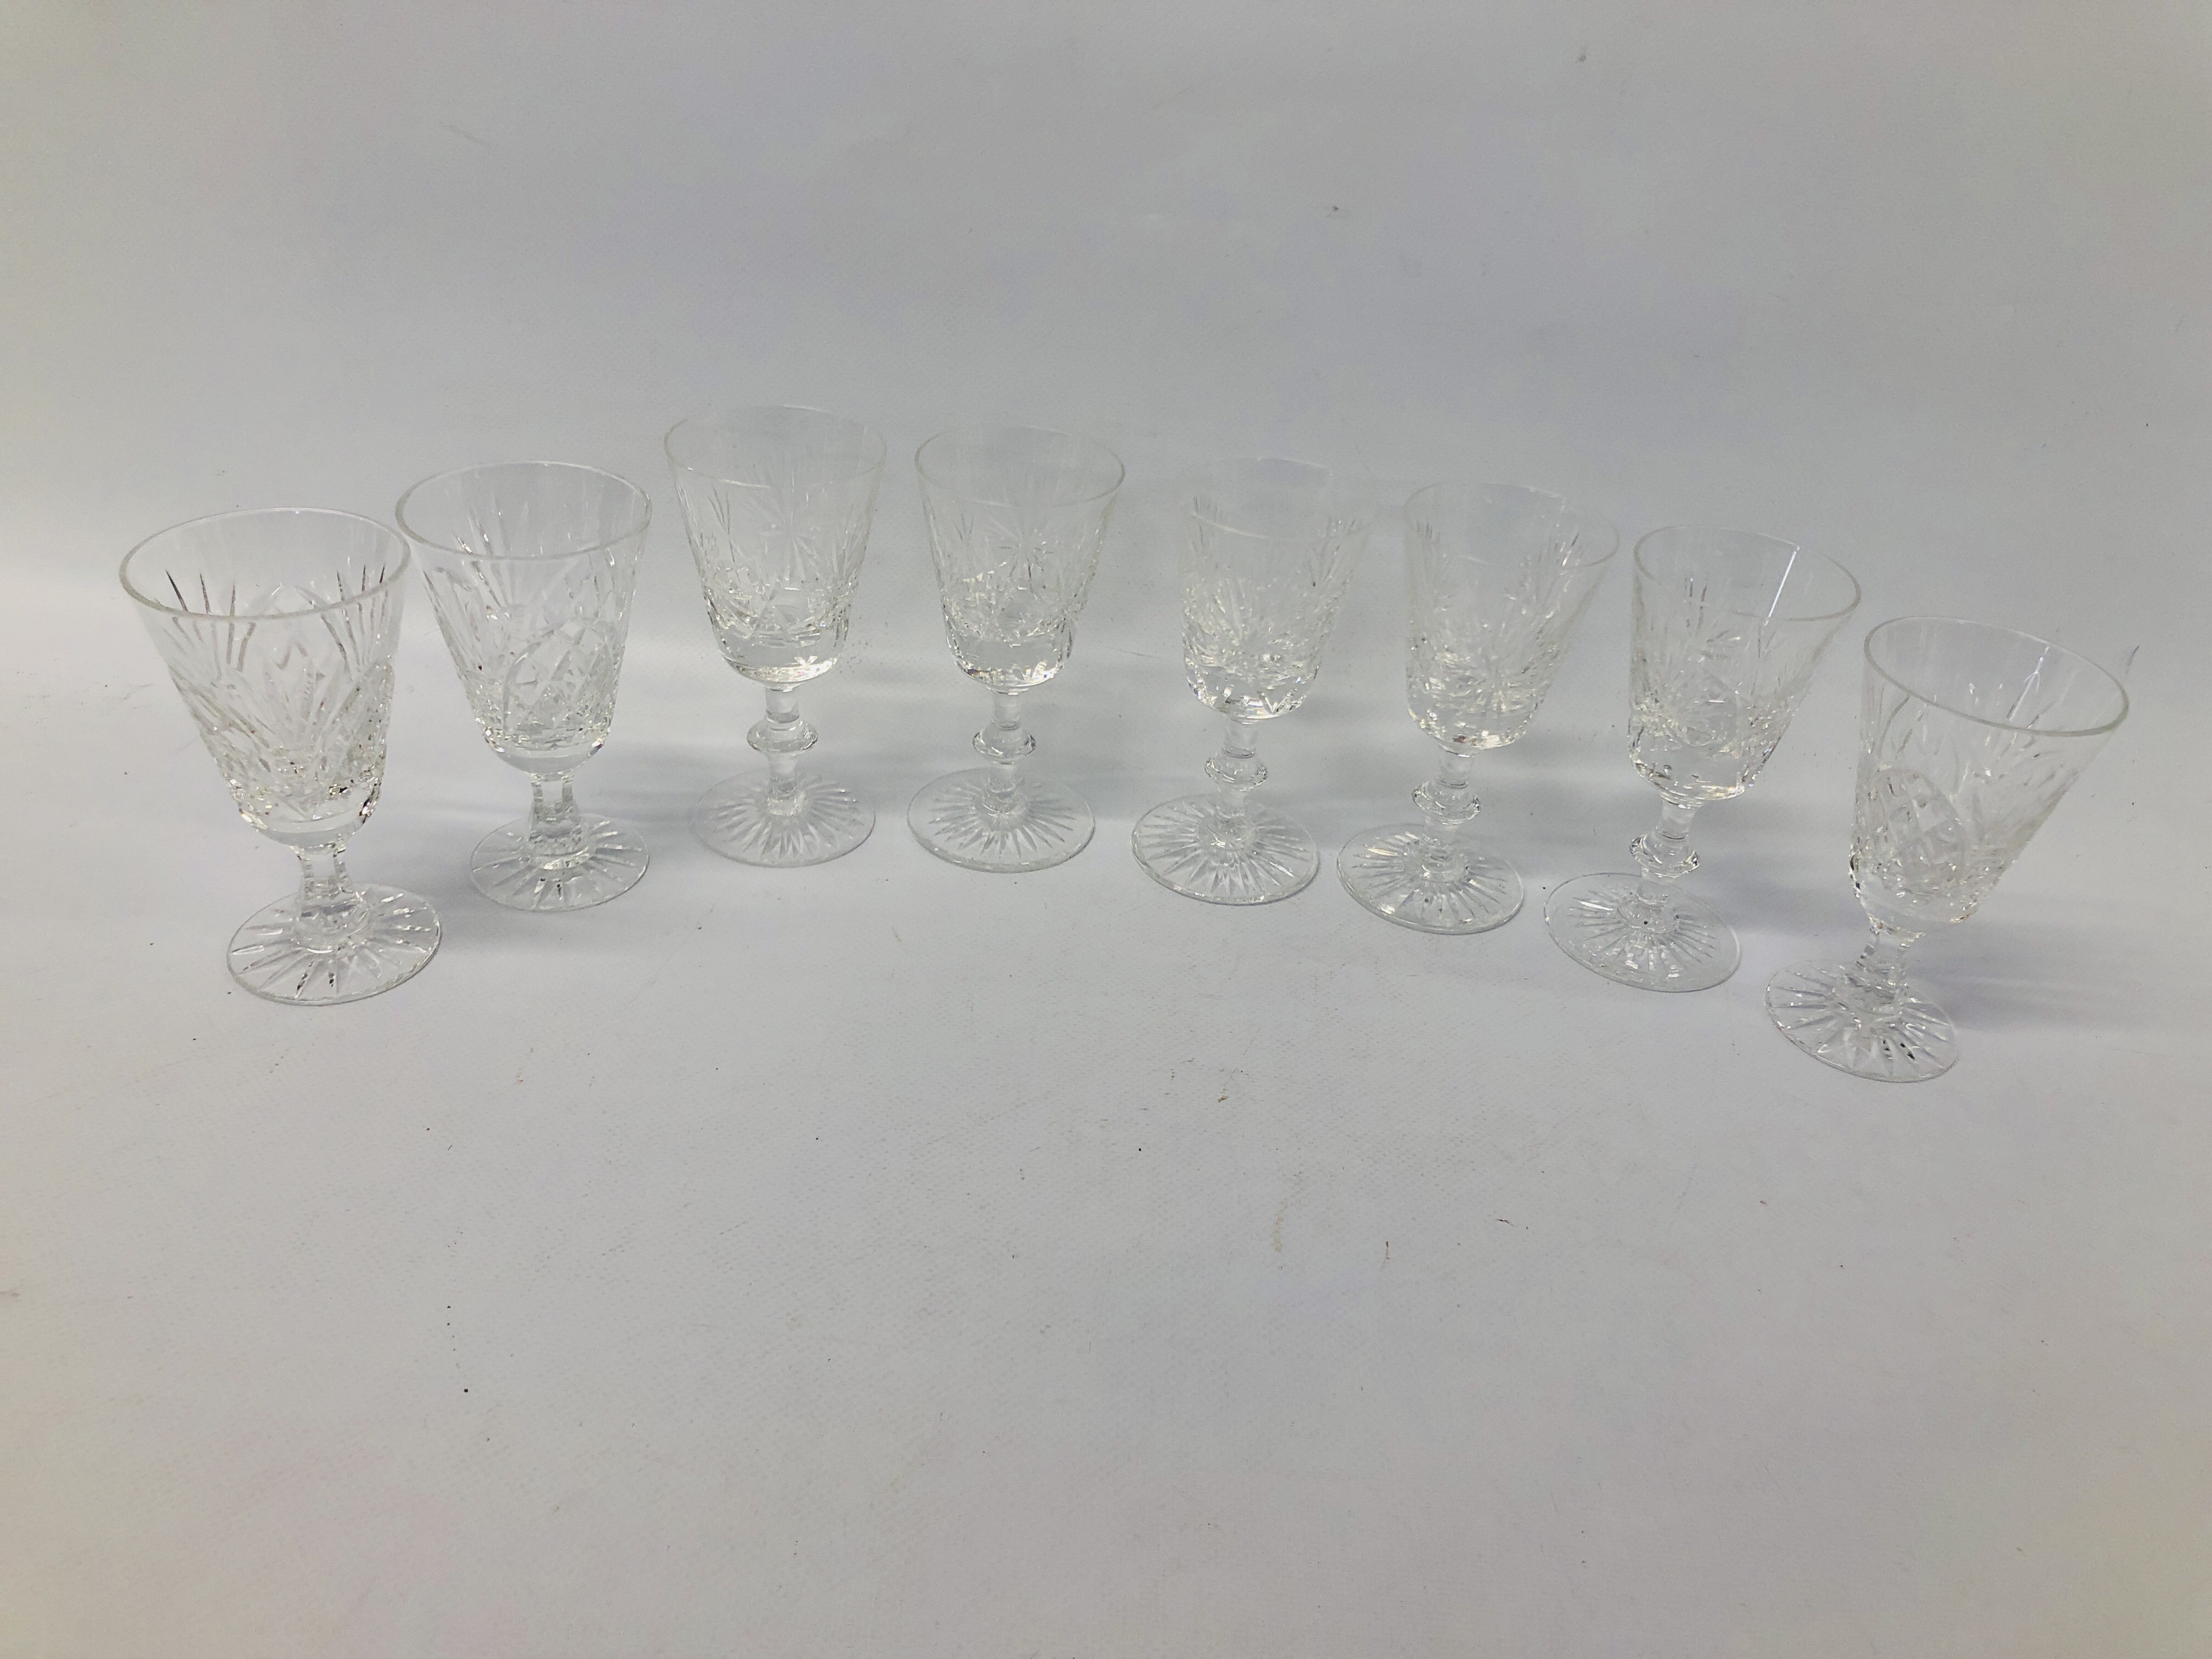 COLLECTION OF GOOD QUALITY CUT GLASS CRYSTAL DRINKING VESSELS ALONG WITH A SET OF 4 HAND PAINTED - Image 9 of 11